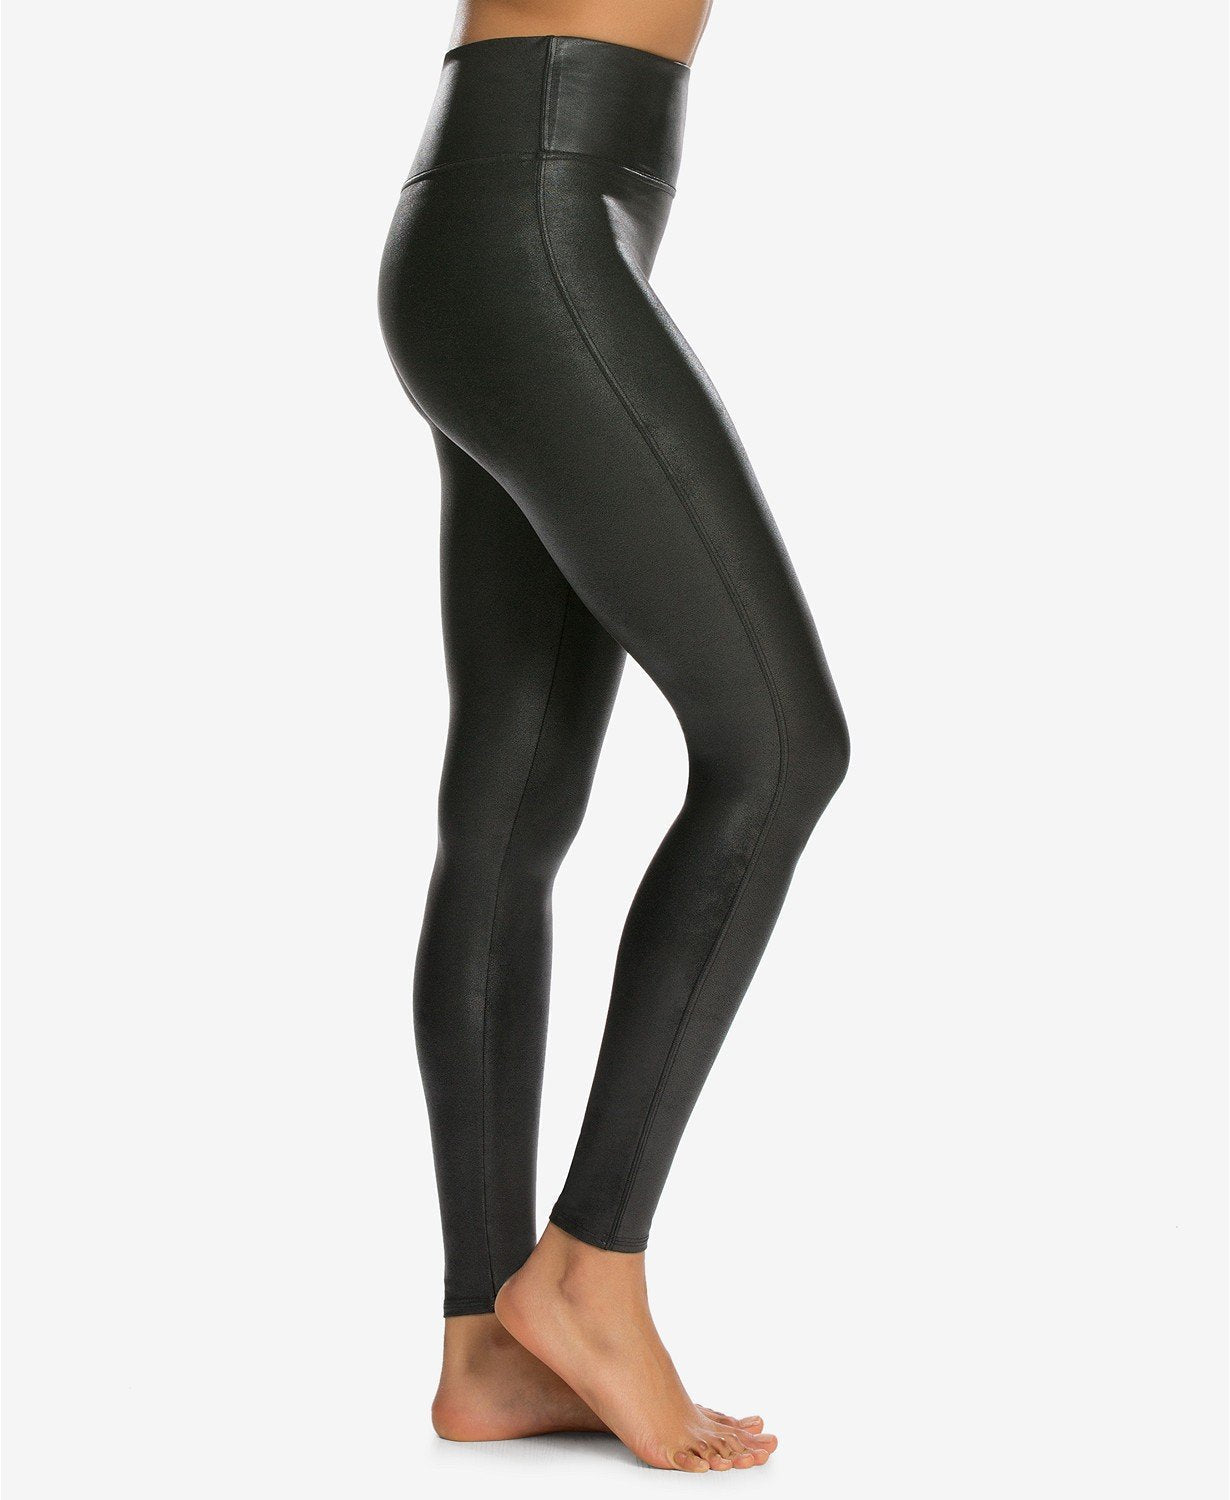 Spanx Faux Leather Quilted Leggings